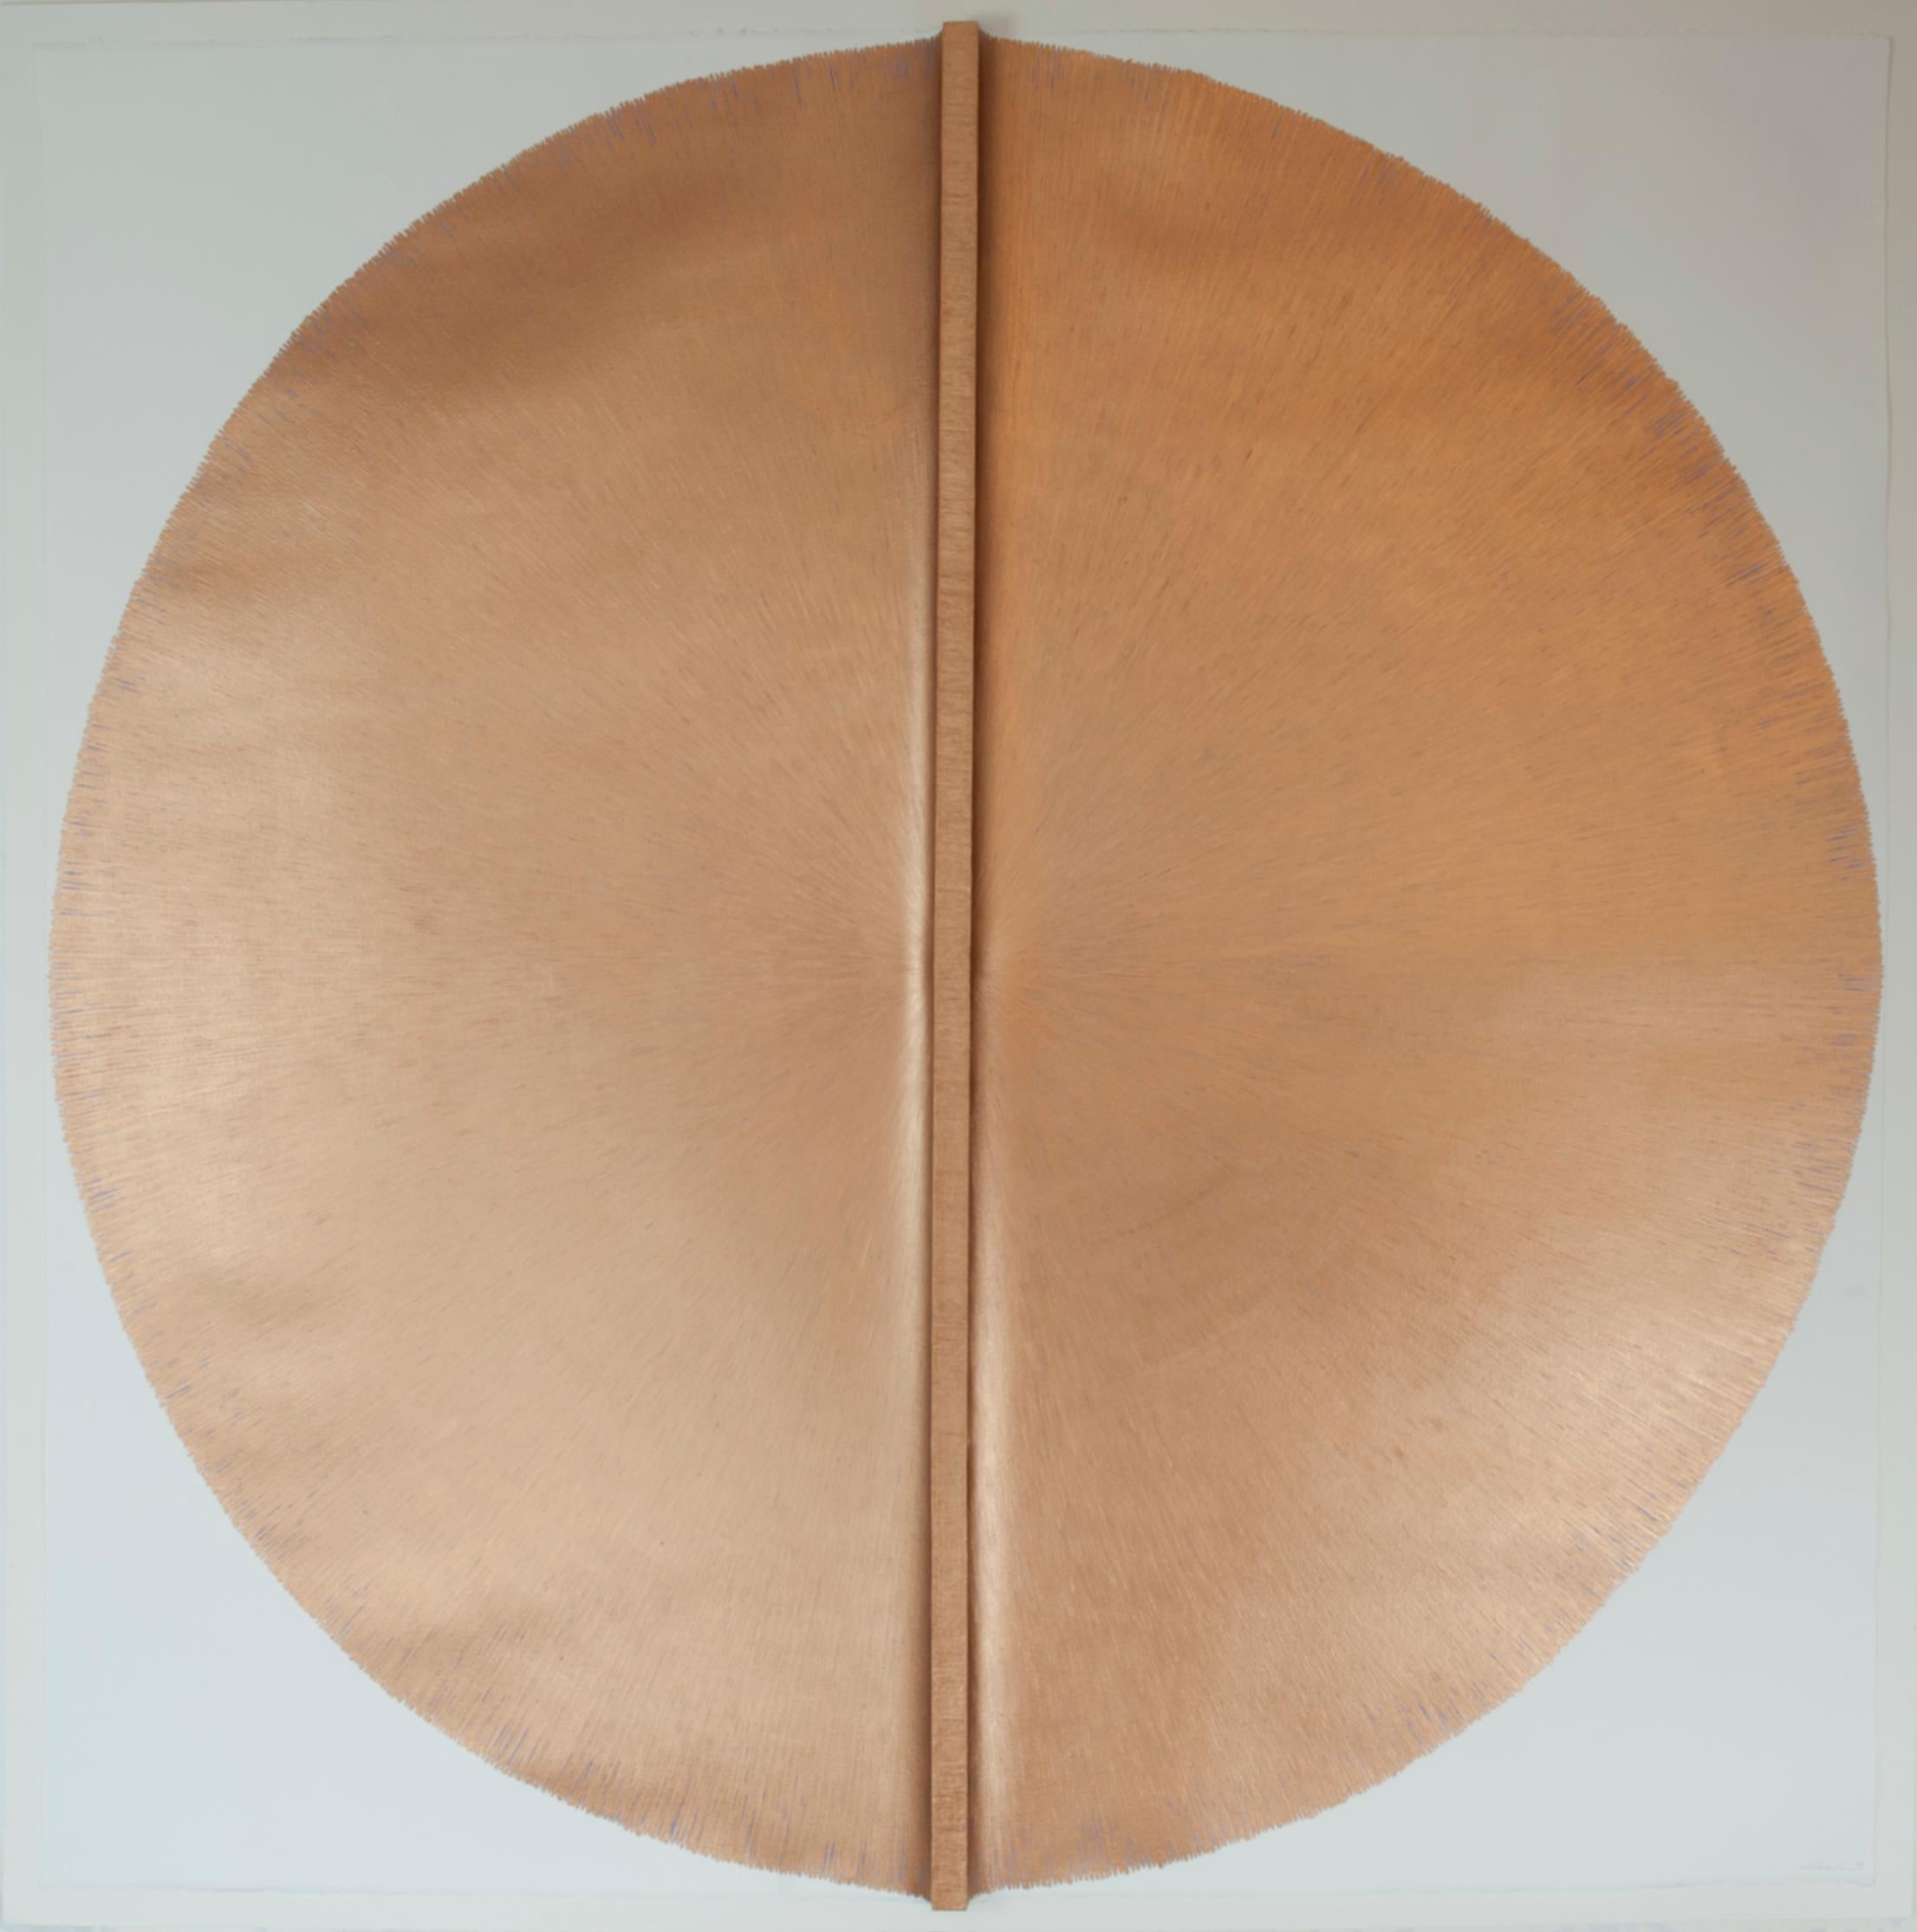 Solid Rod IX: Large, Gold Circle Painting on paper and wood by Silvia Lerin